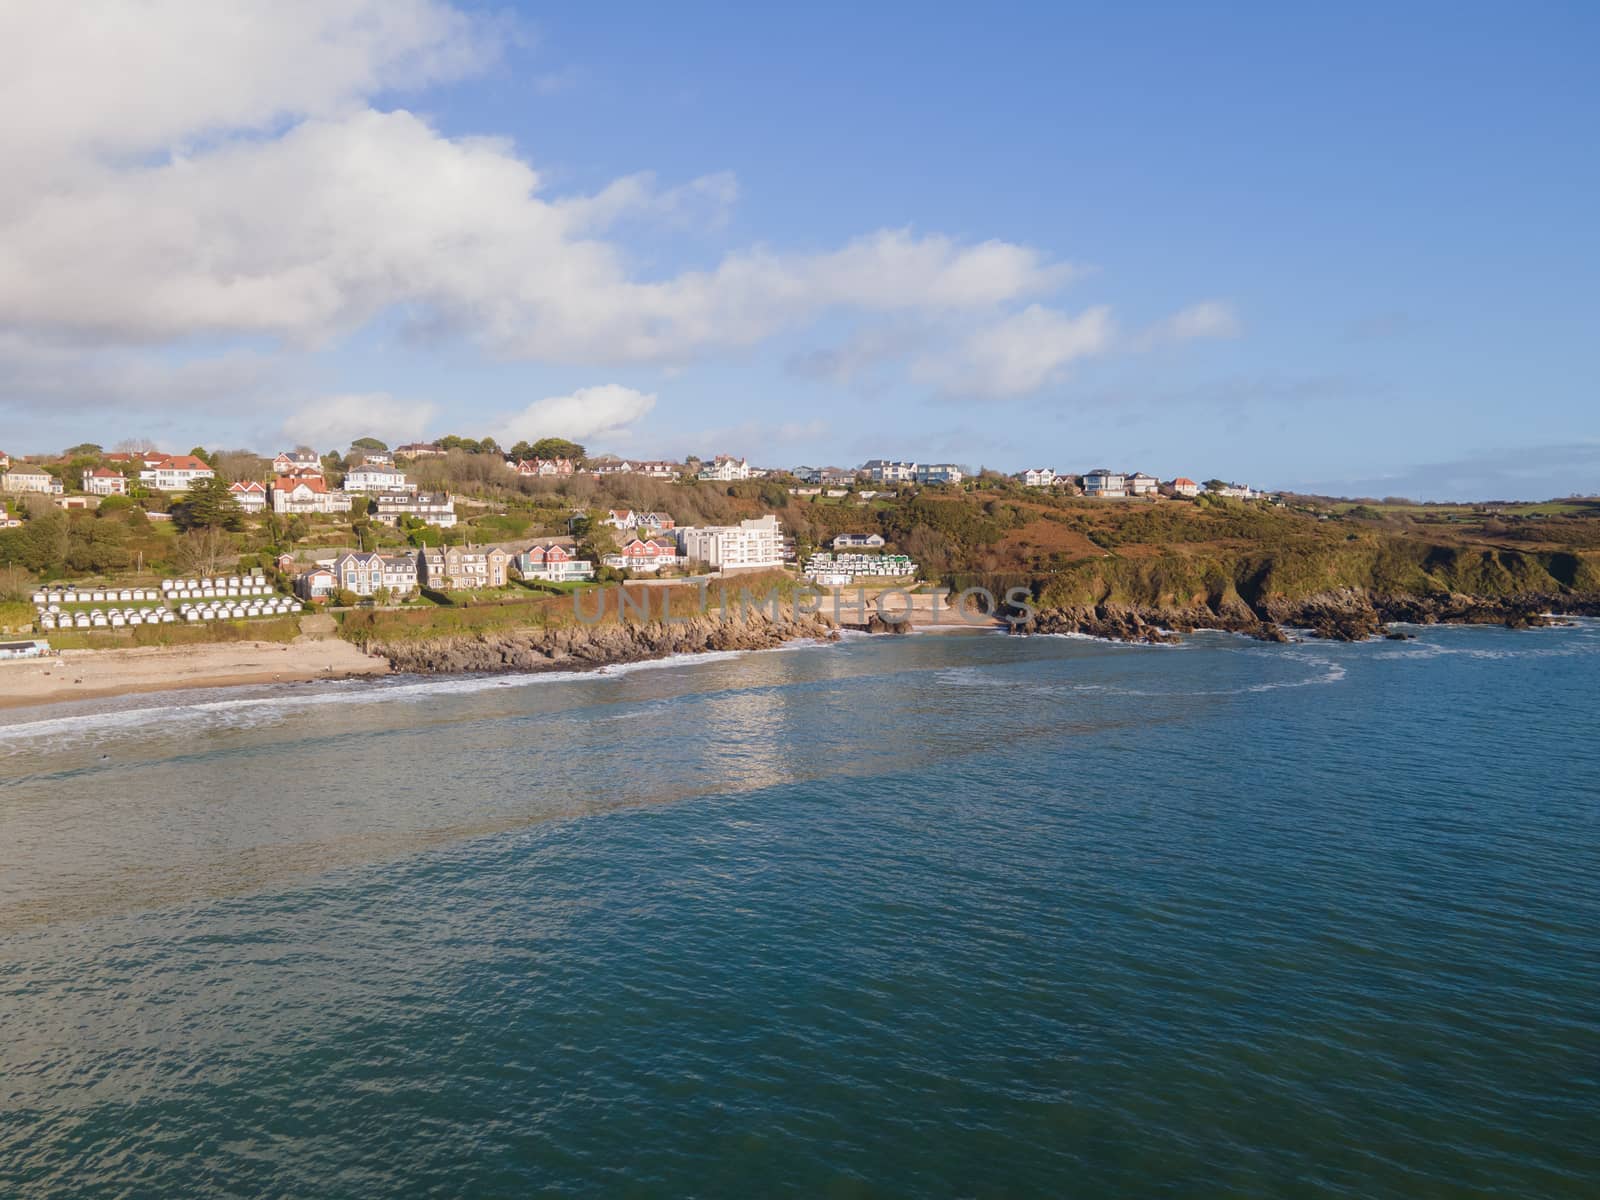 Looking Into Langland Bay in Gower, Wales, UK from the sea on a clean late Autumn day. Blue skies with some clouds by WCLUK